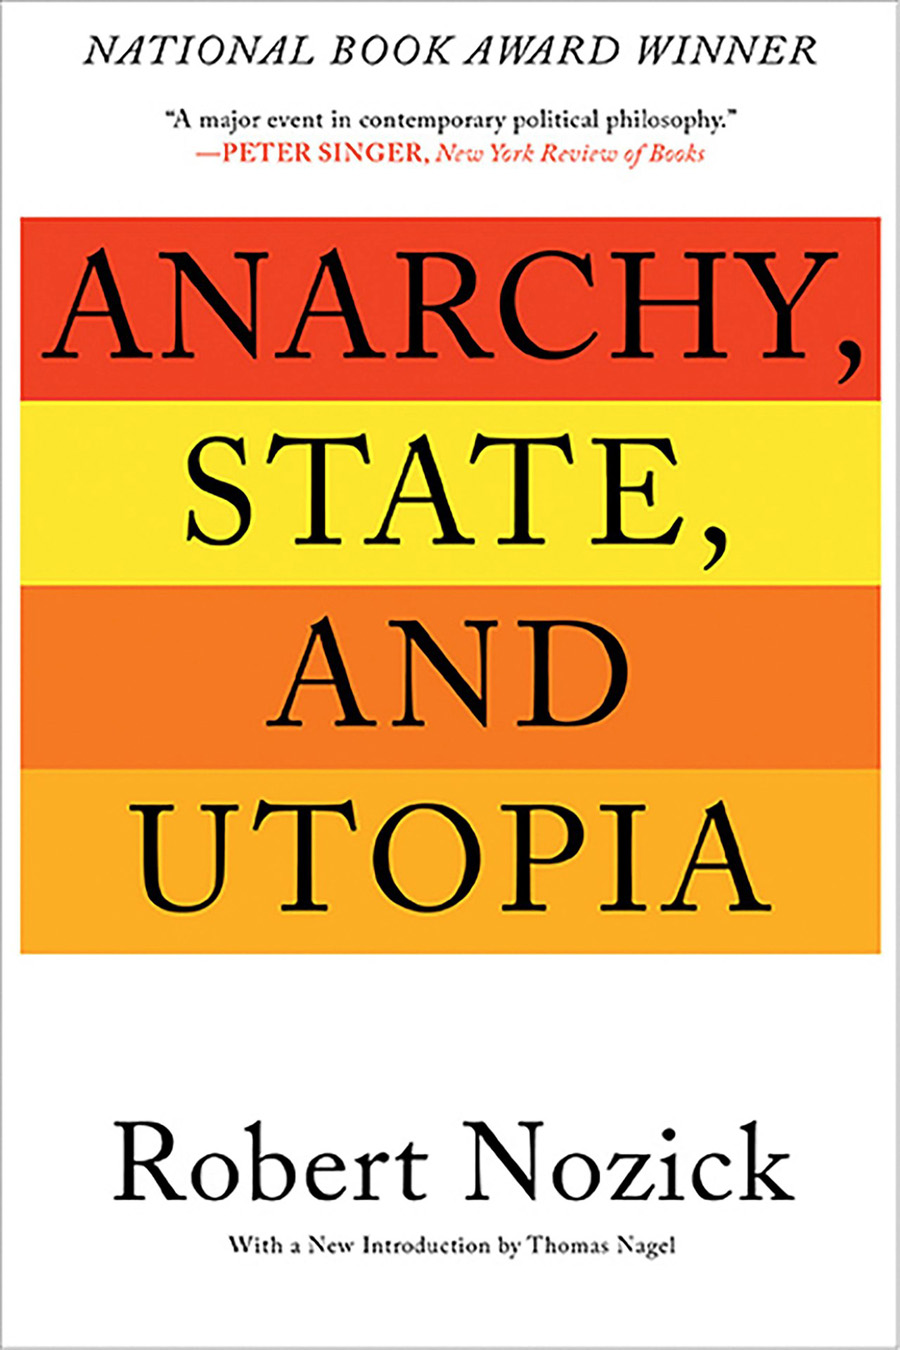 Anarchic state and utopia